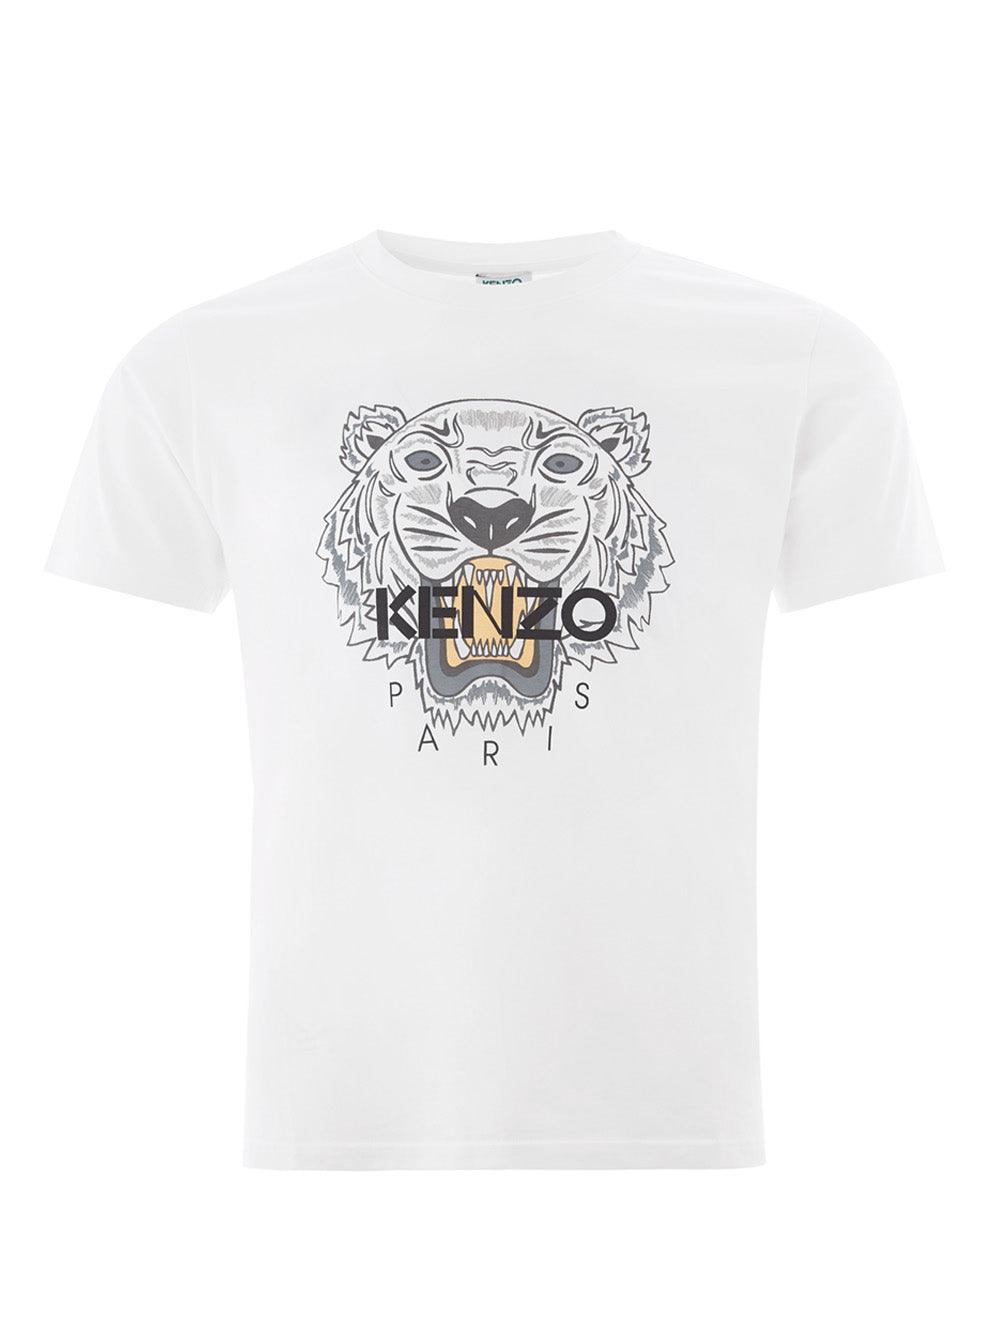 Kenzo White Cotton T-Shirt with Tiger Print - Ellie Belle